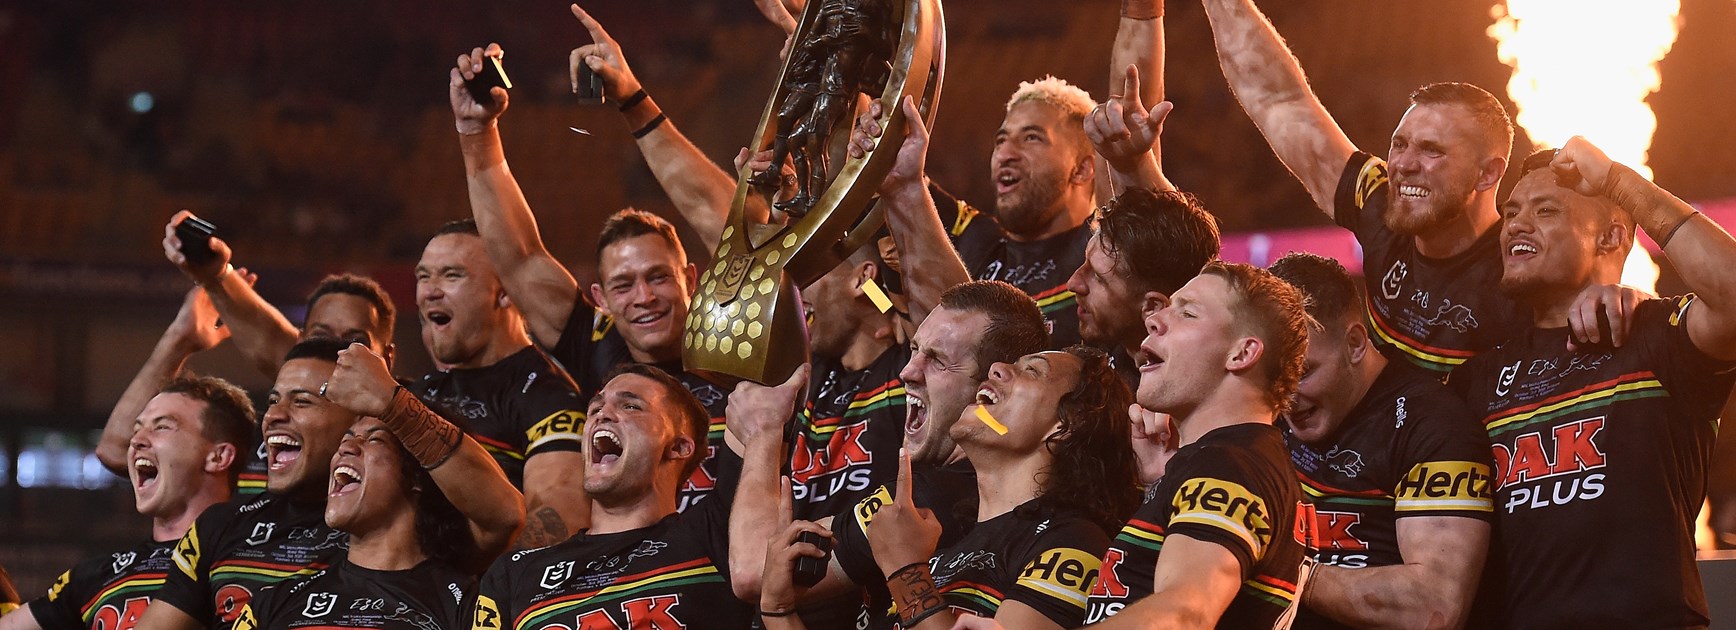 Penrith Panthers hold up the Telstra Premiership trophy.